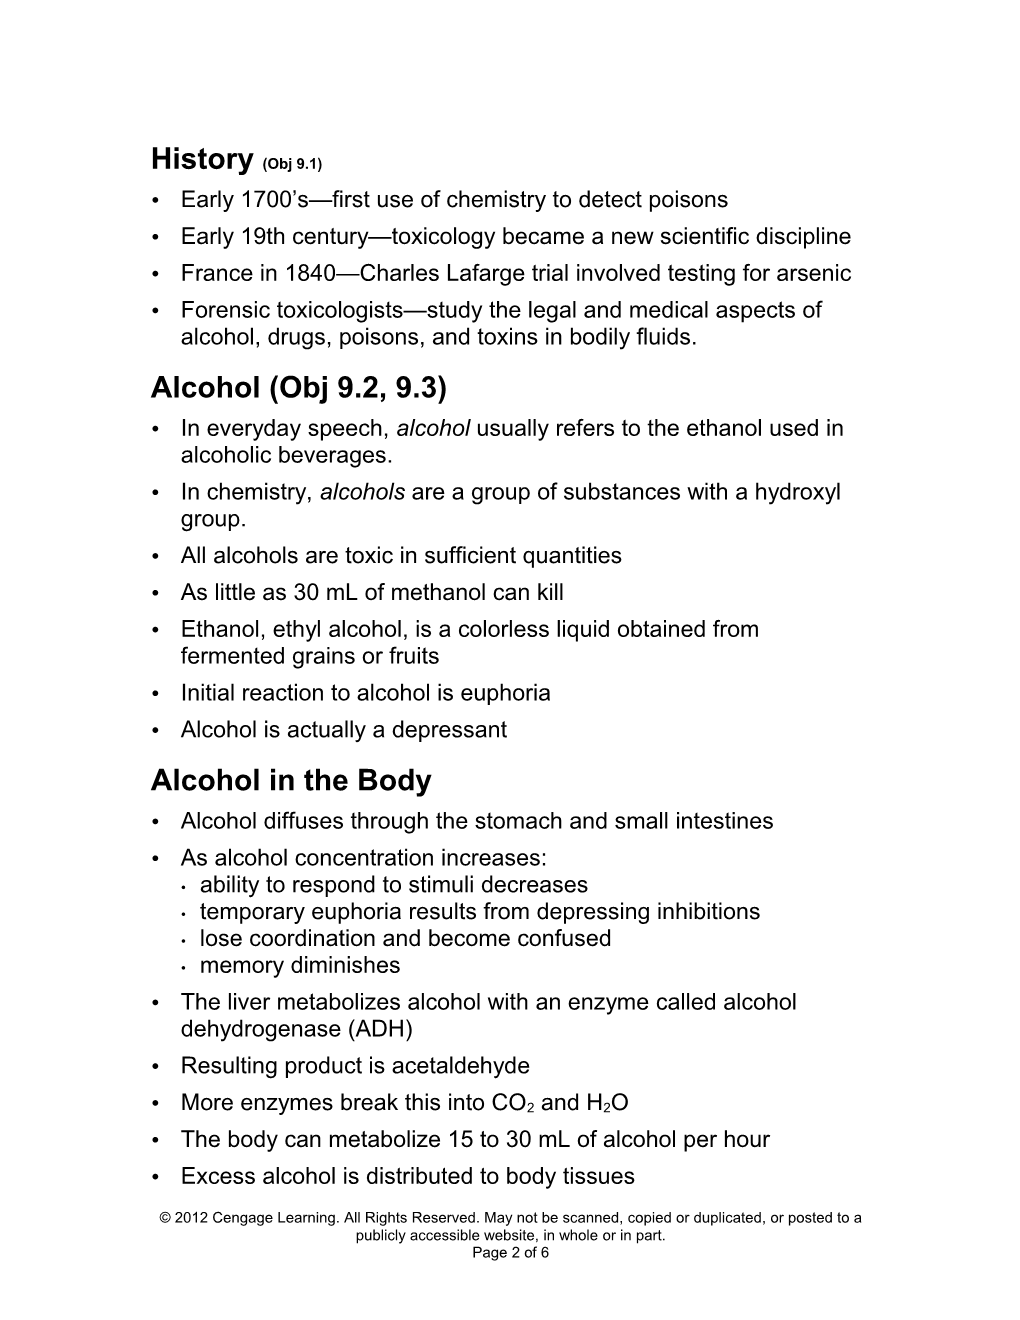 Chapter 9 Physiology of Alcohol and Poisons